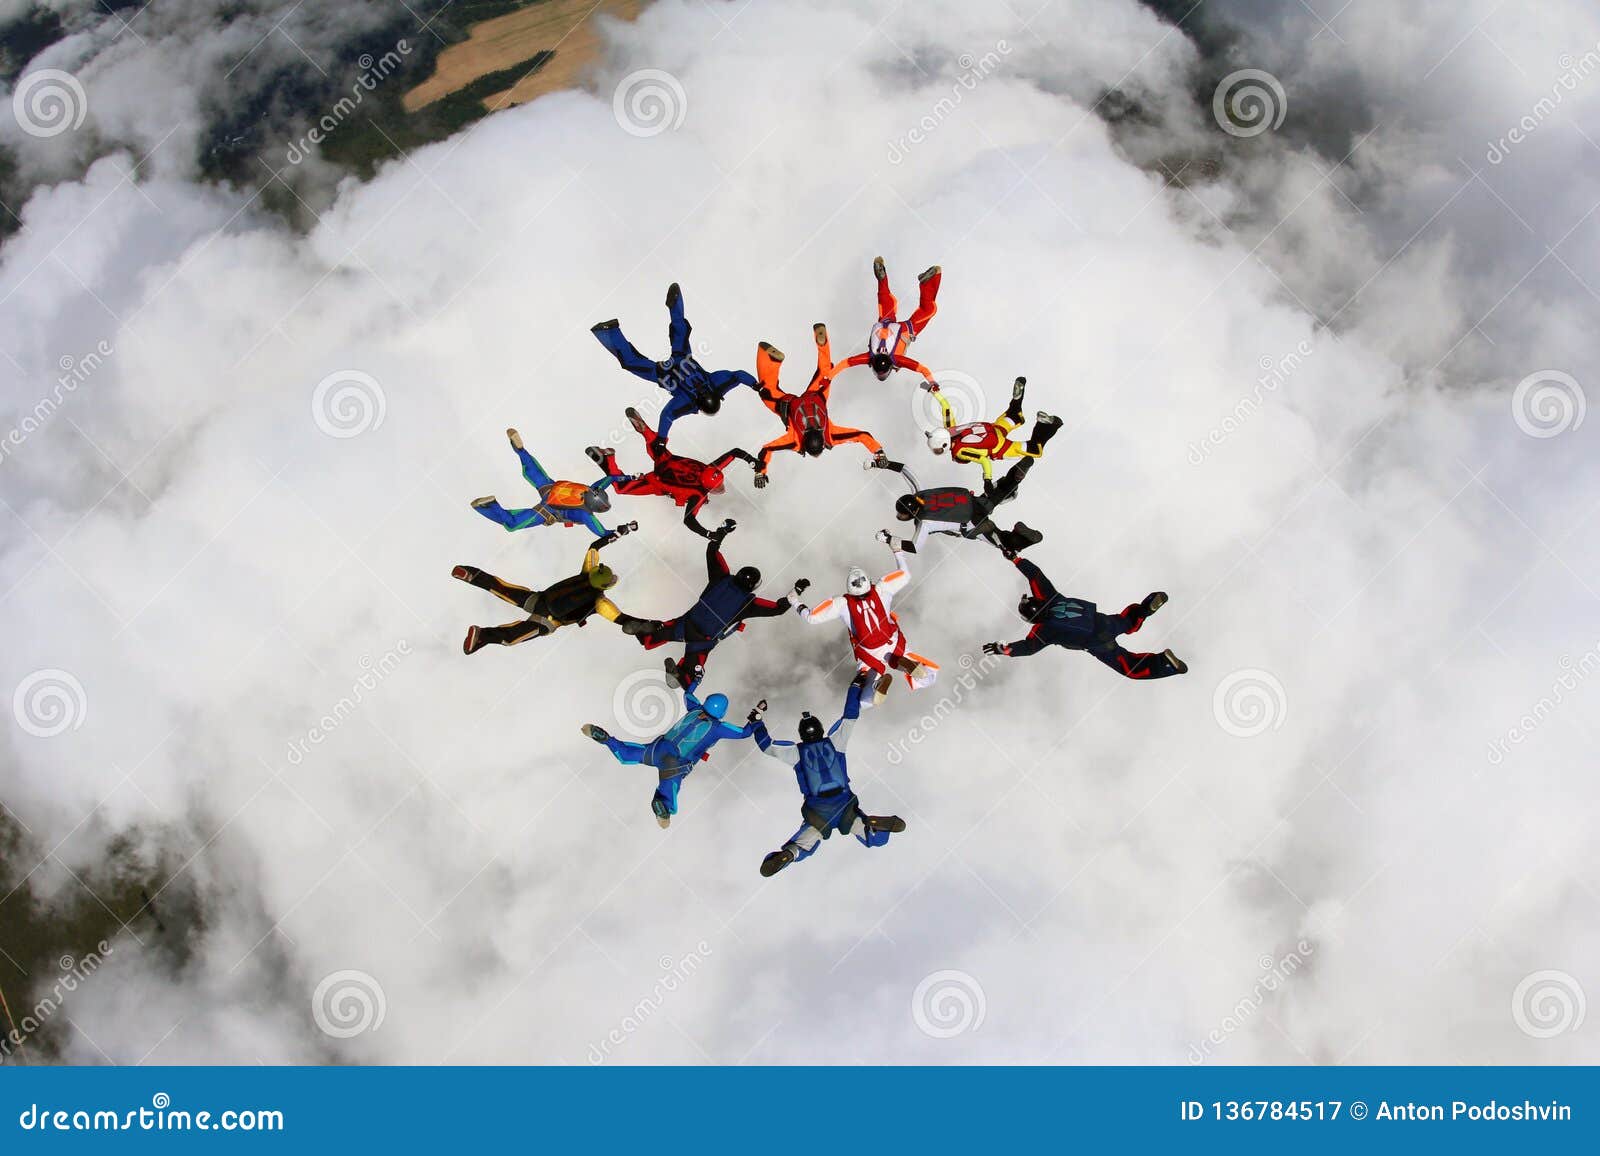 Formation Skydiving Above White Cloud. Stock Image - Image of ...